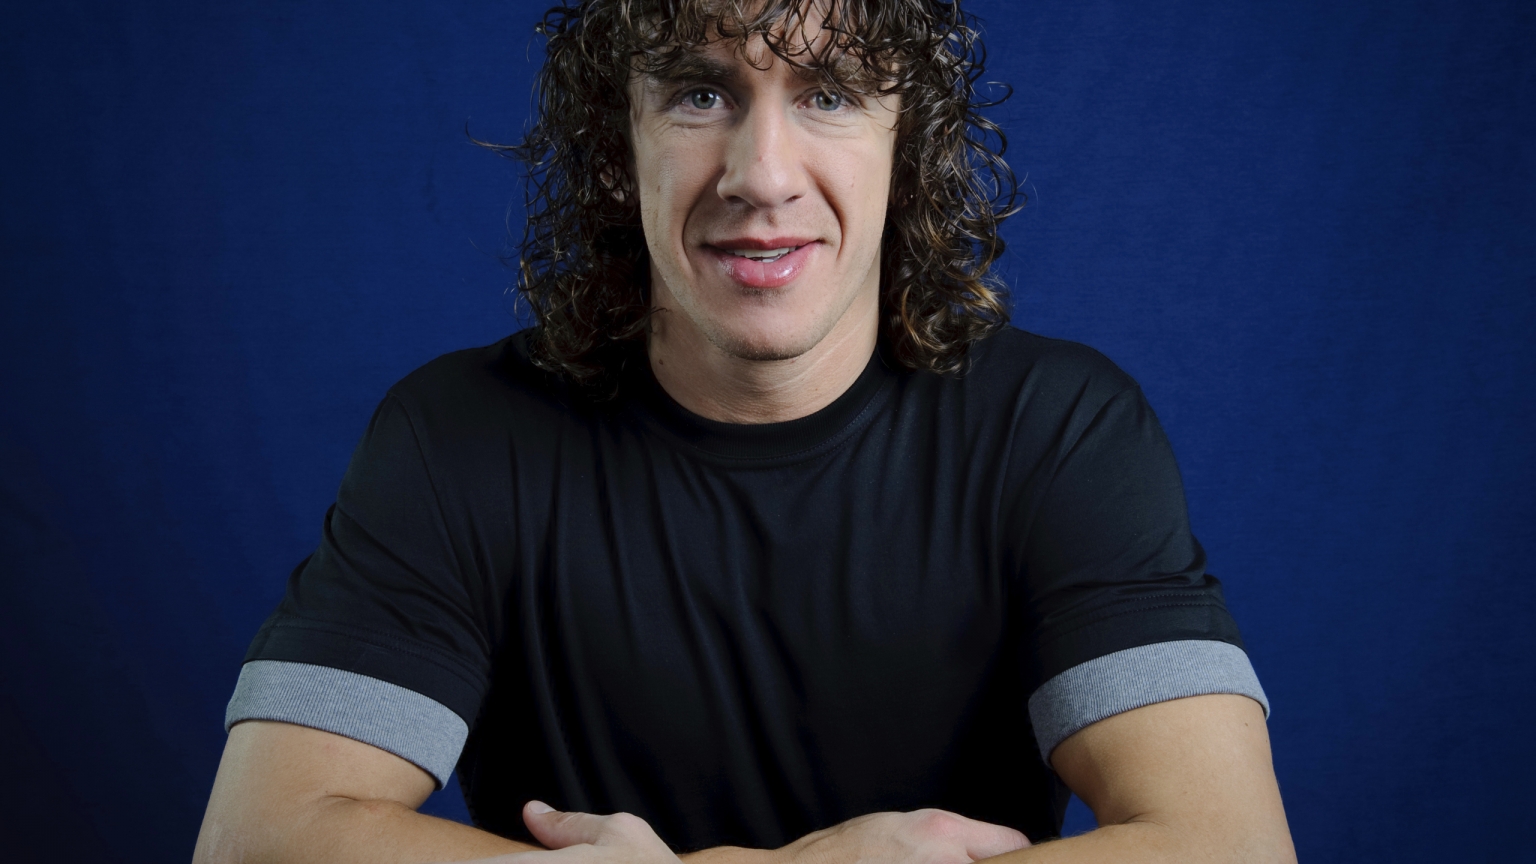 Carles Puyol Smile for 1536 x 864 HDTV resolution